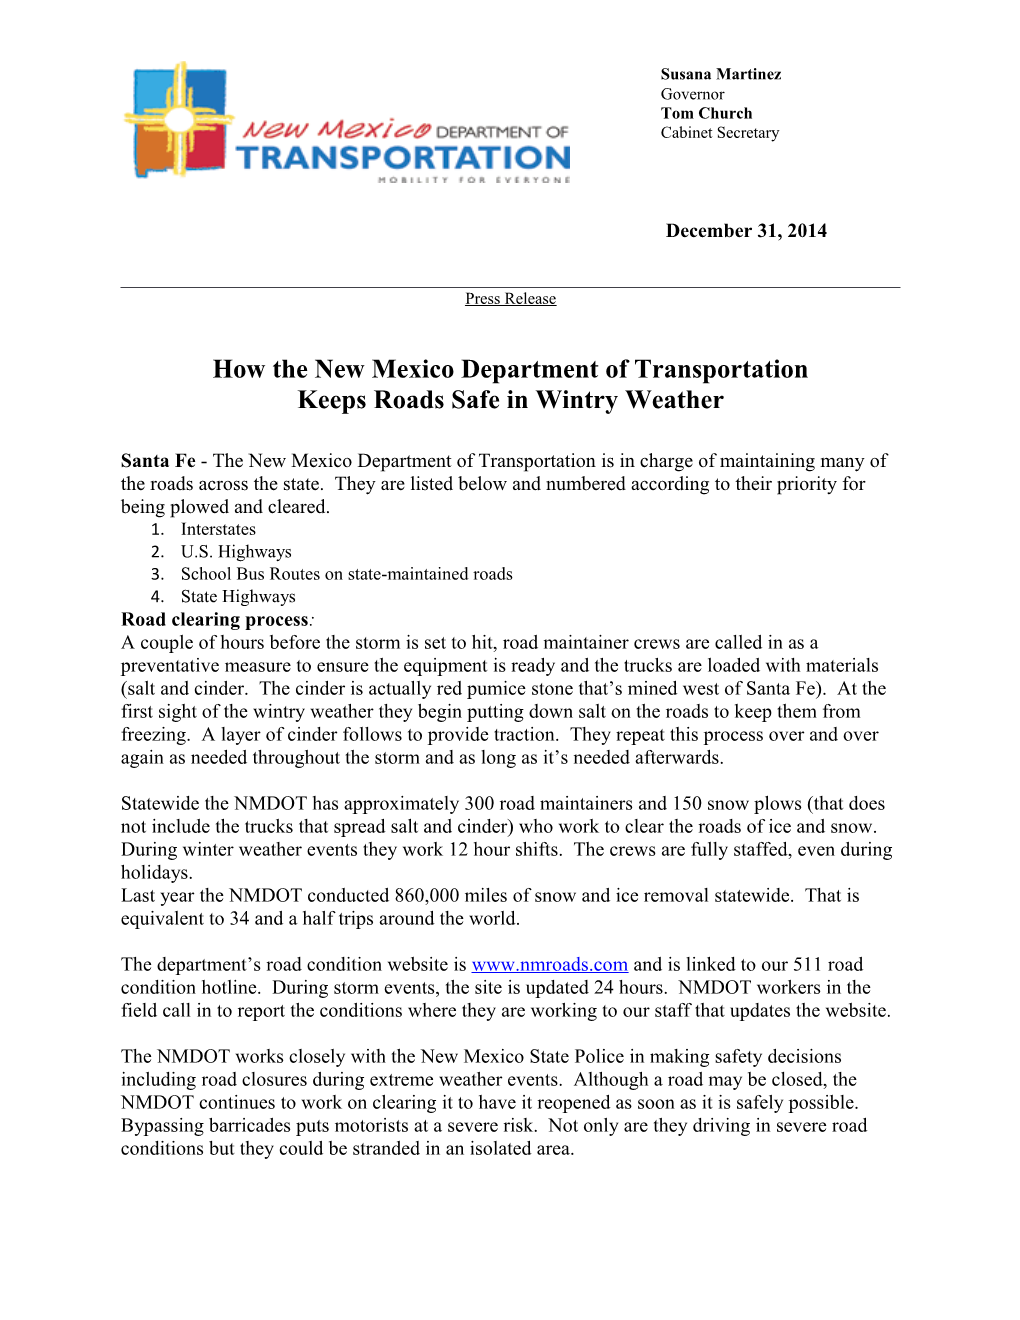 How the New Mexico Department of Transportation